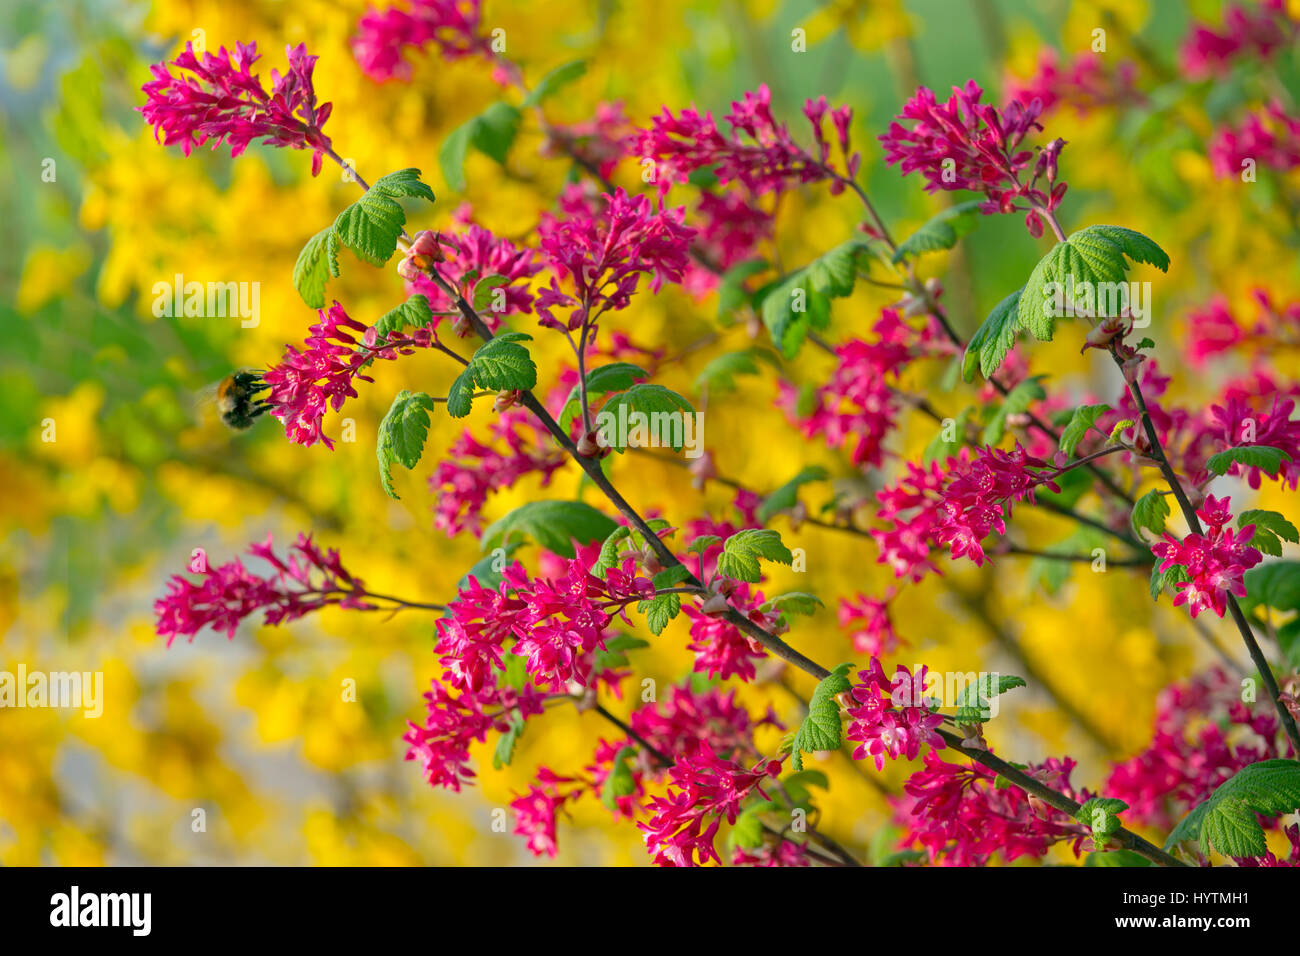 Flowering red currant Ribes sanguineum and Forsythia × intermedia Stock Photo